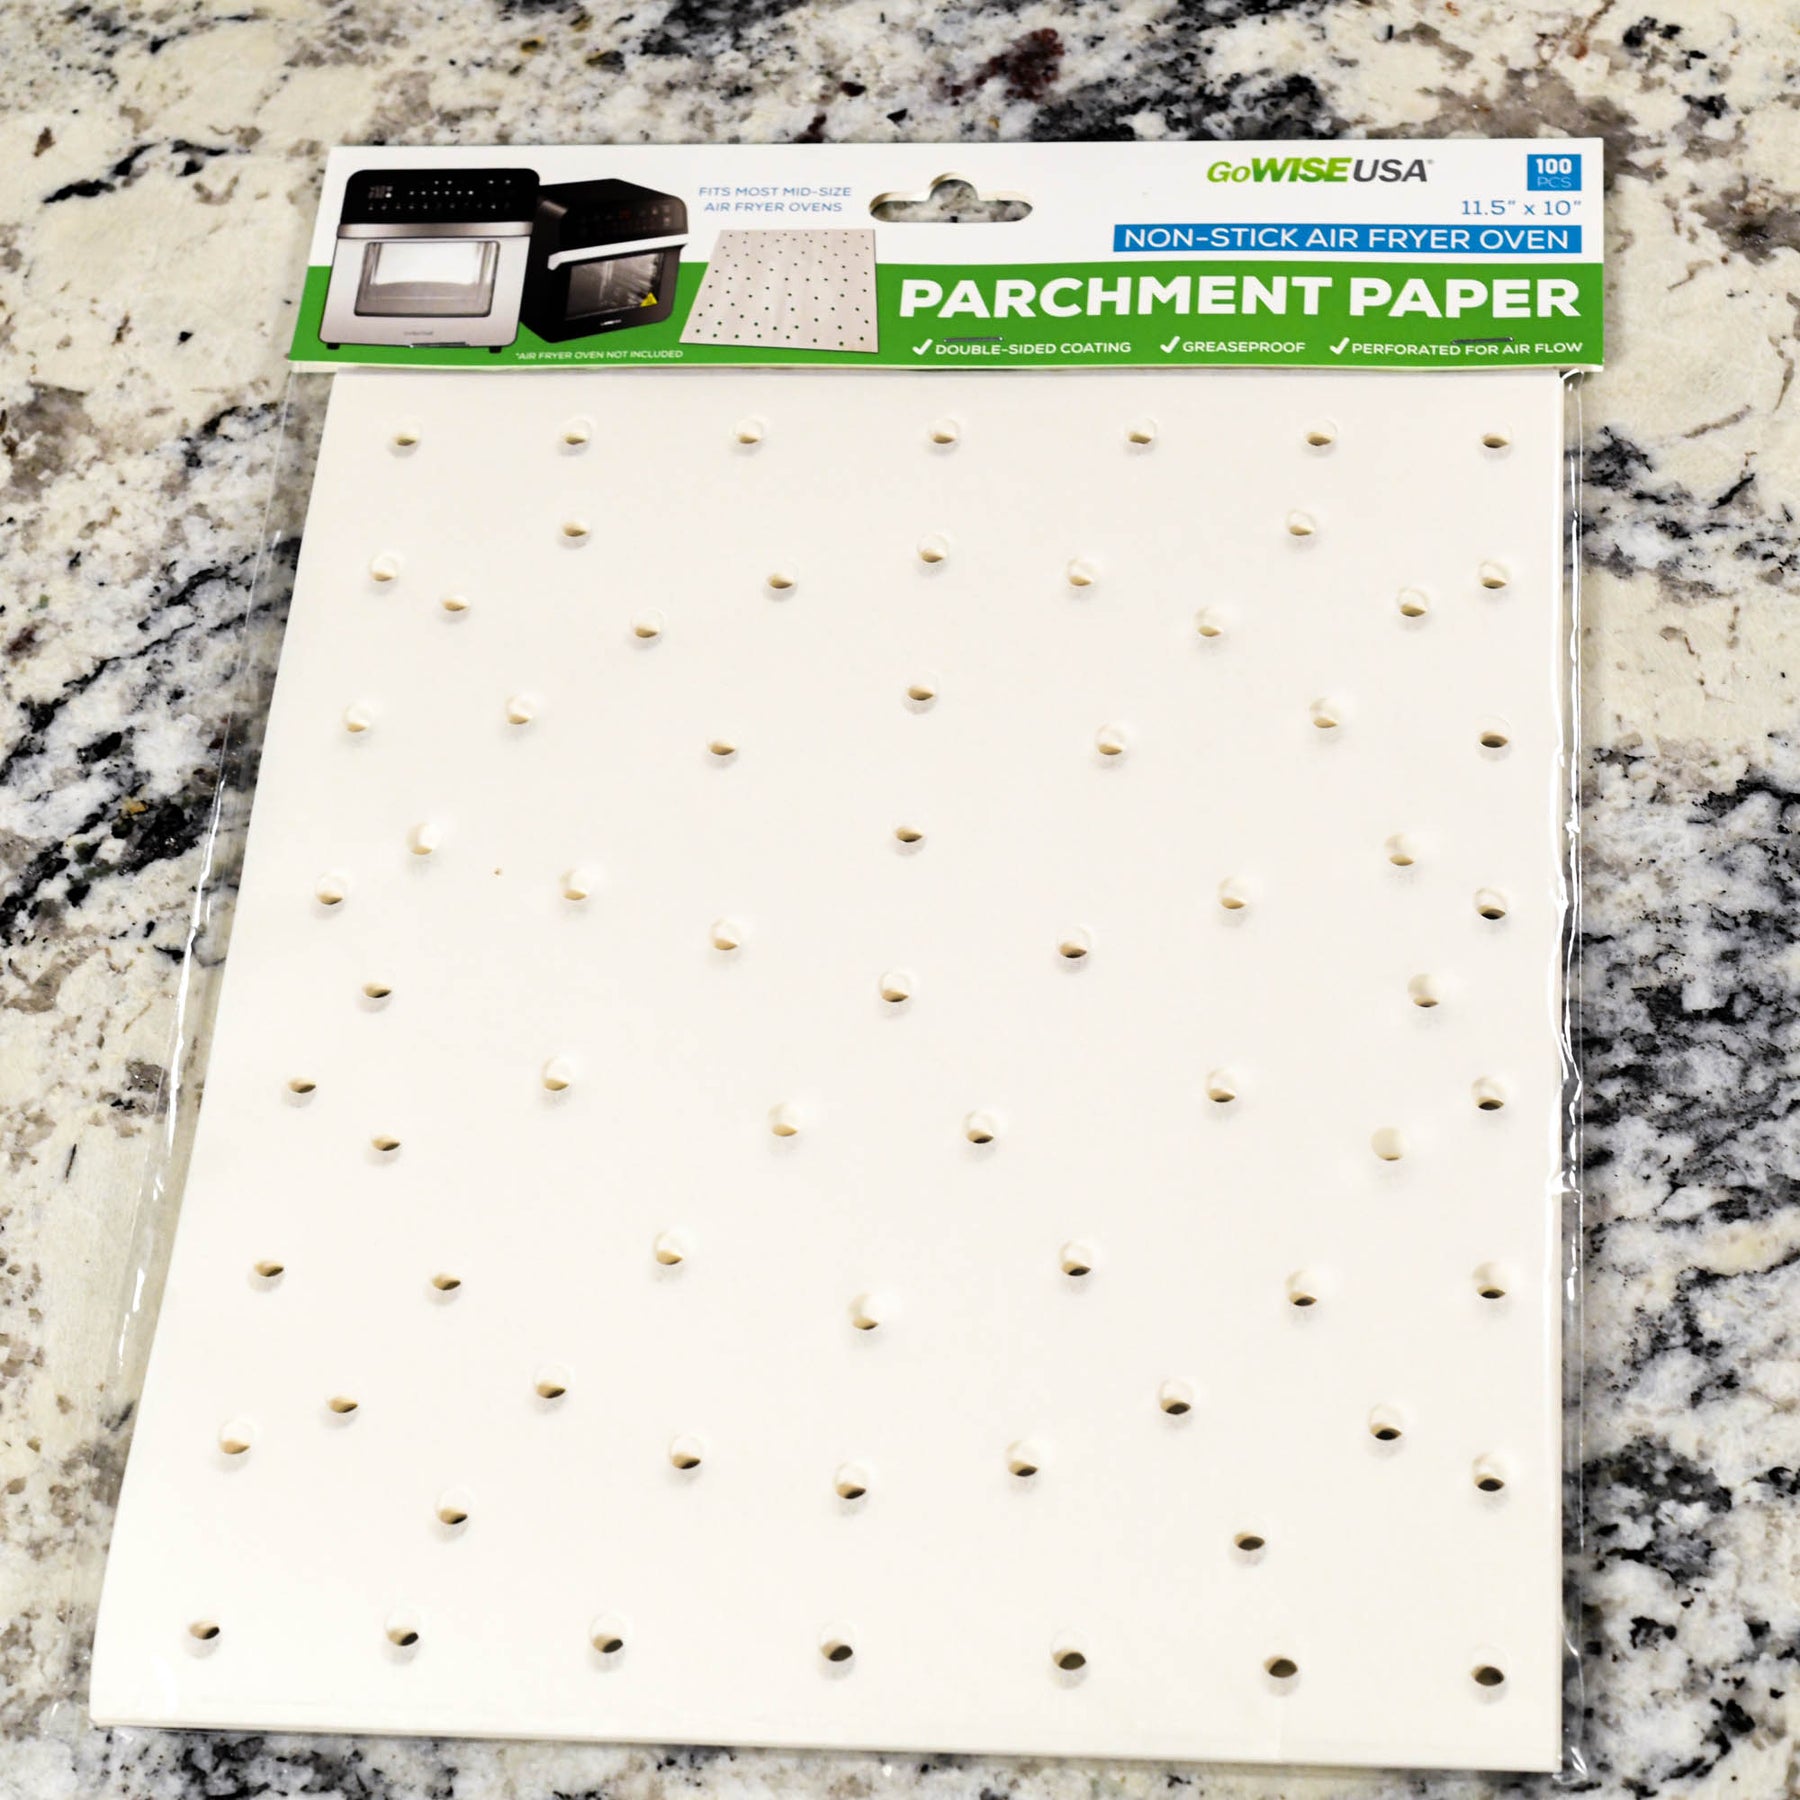 11.5" x 10" Perforated Parchment Non-Stick Liners for Air Fryer Toaster Ovens, 100 Pcs